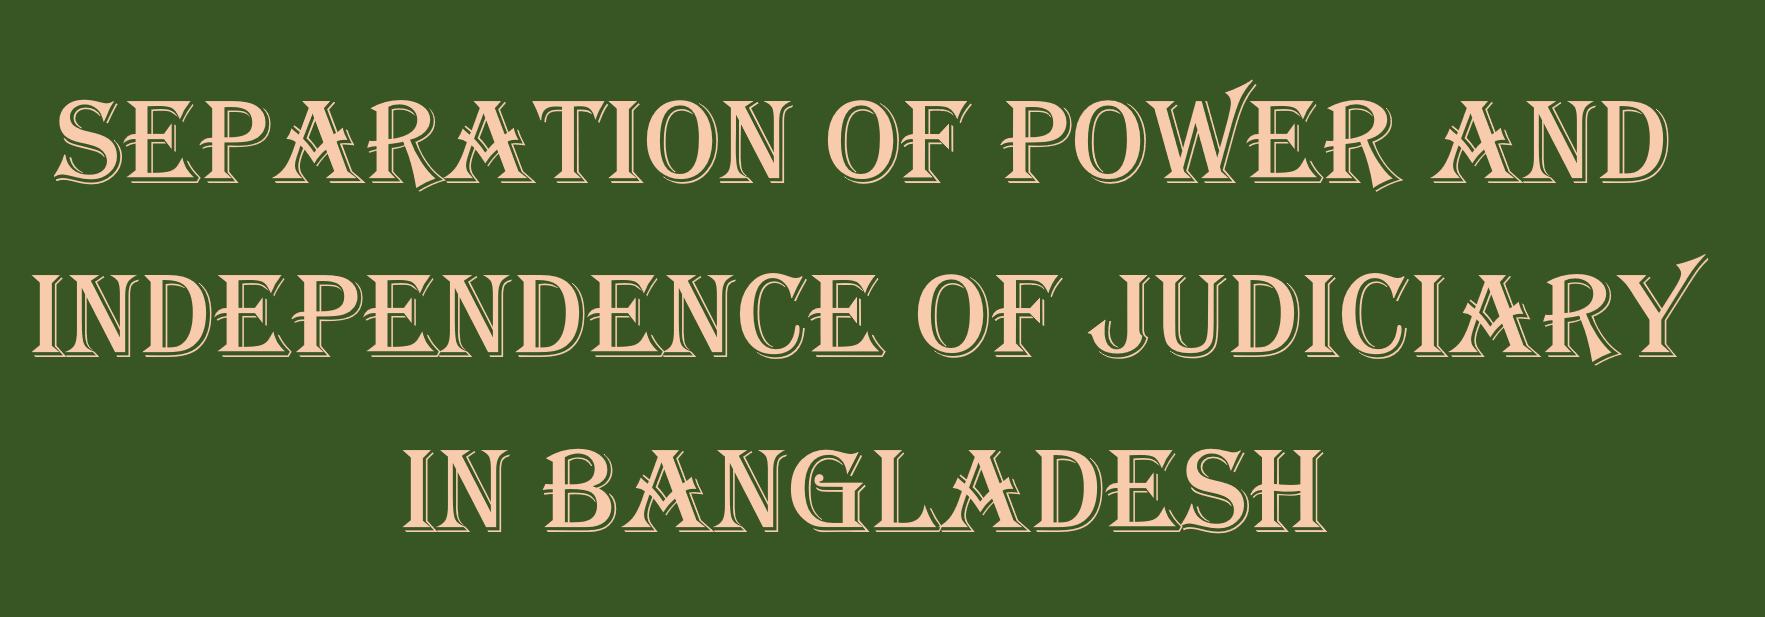 Separation of Power and Independence of Judiciary in Bangladesh 